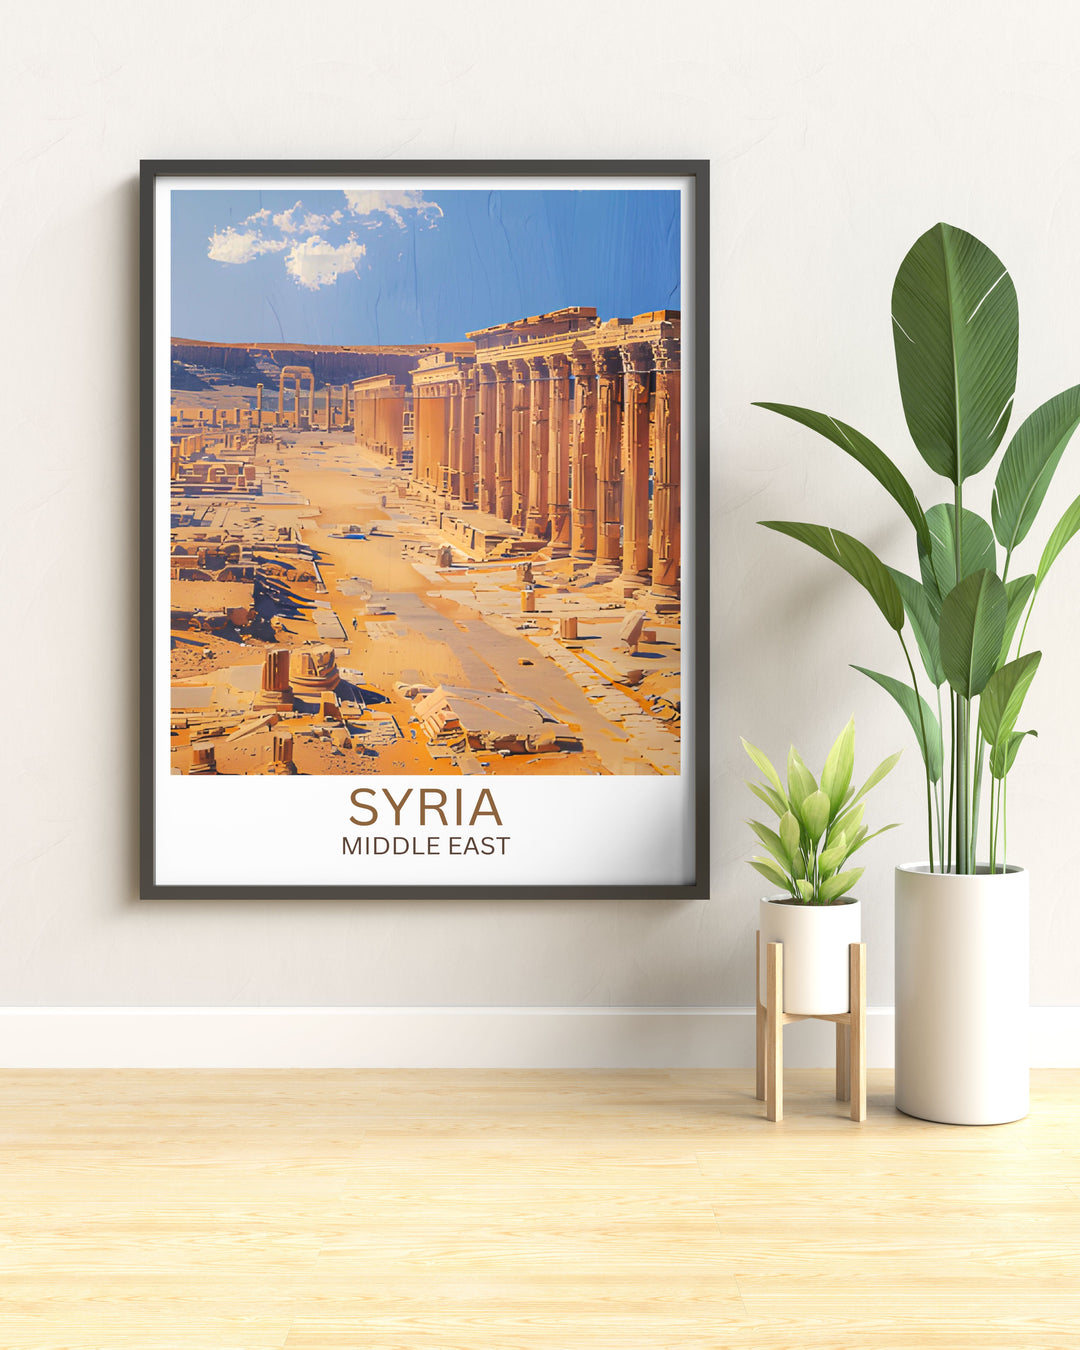 Syria art print featuring Palmyras historical sites, ideal for adding a touch of ancient civilization to your gallery wall.